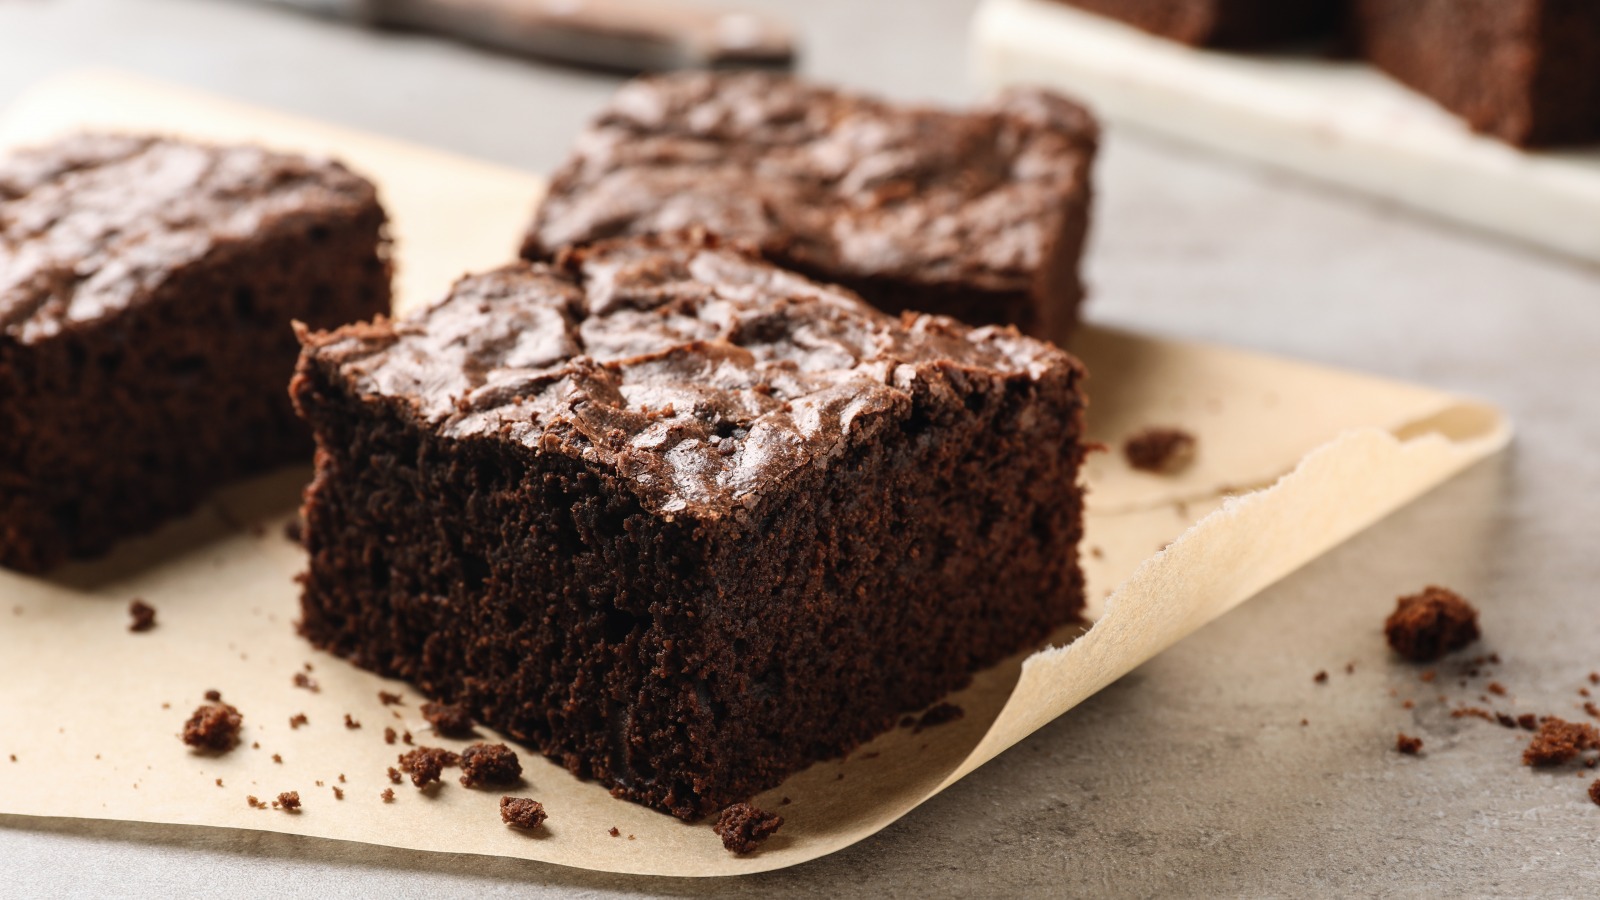 Brownie Vs Cake: What's The Difference? - Differencely